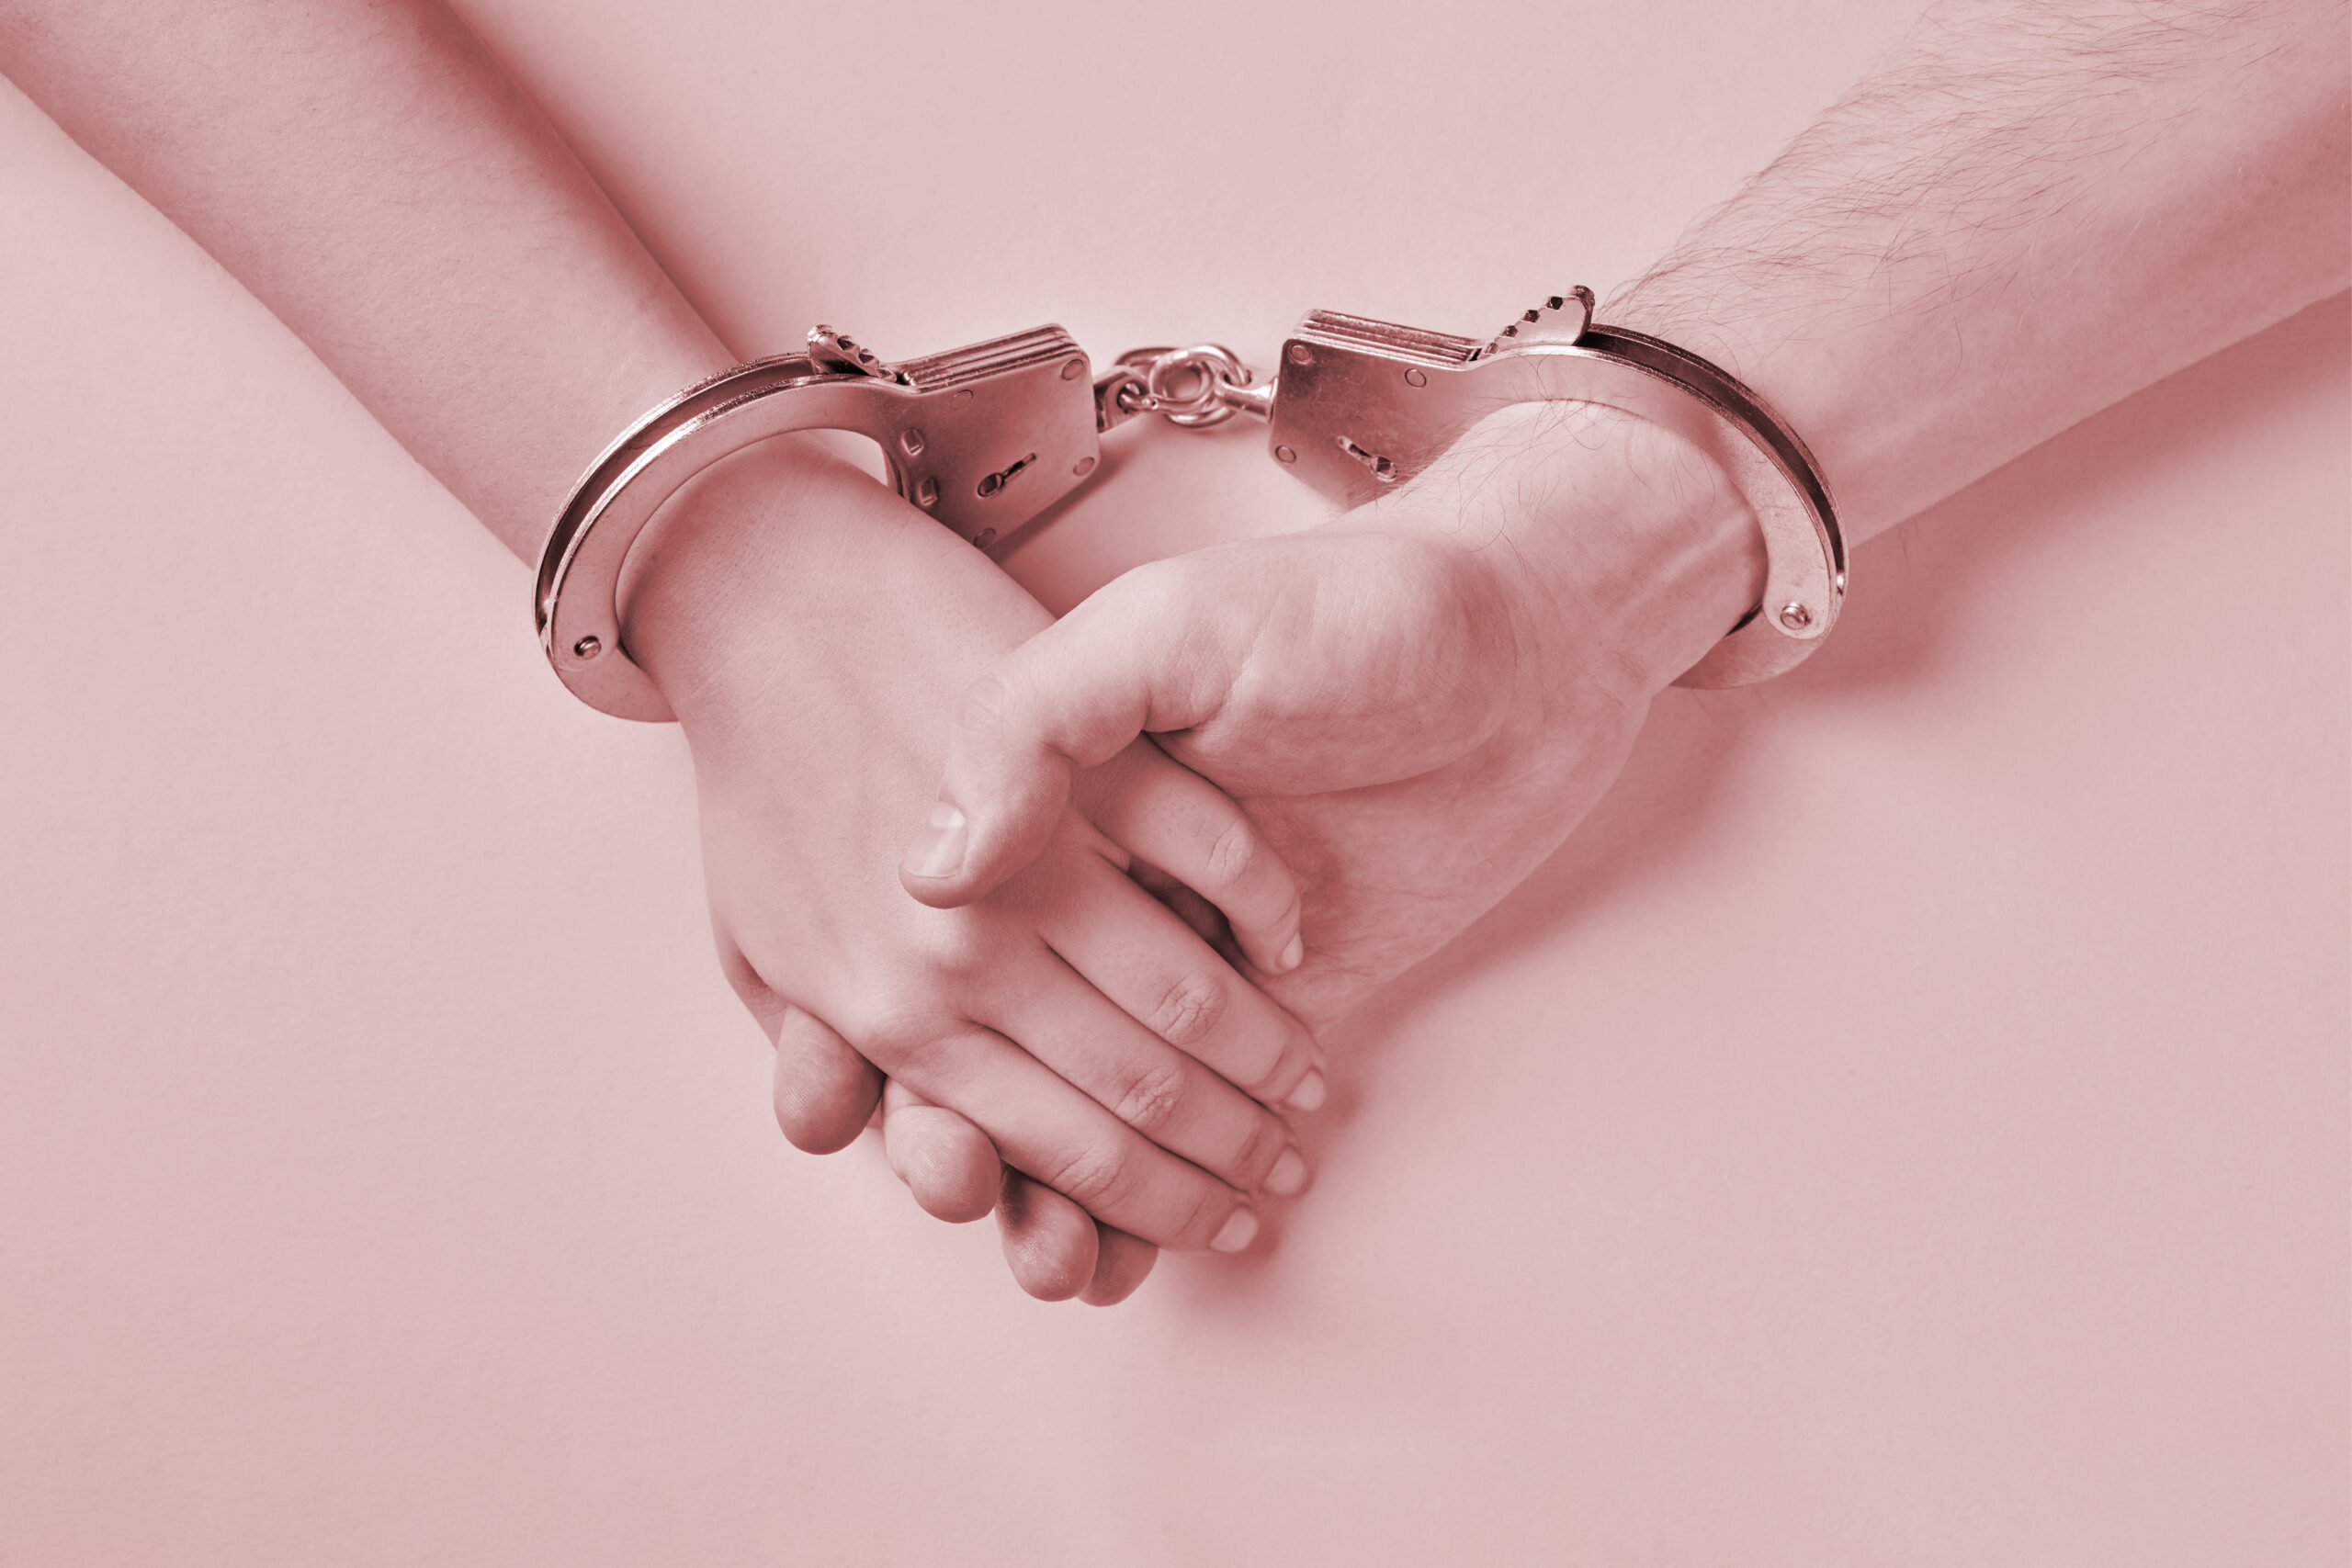 Male and female hands in handcuffs. Love forever.